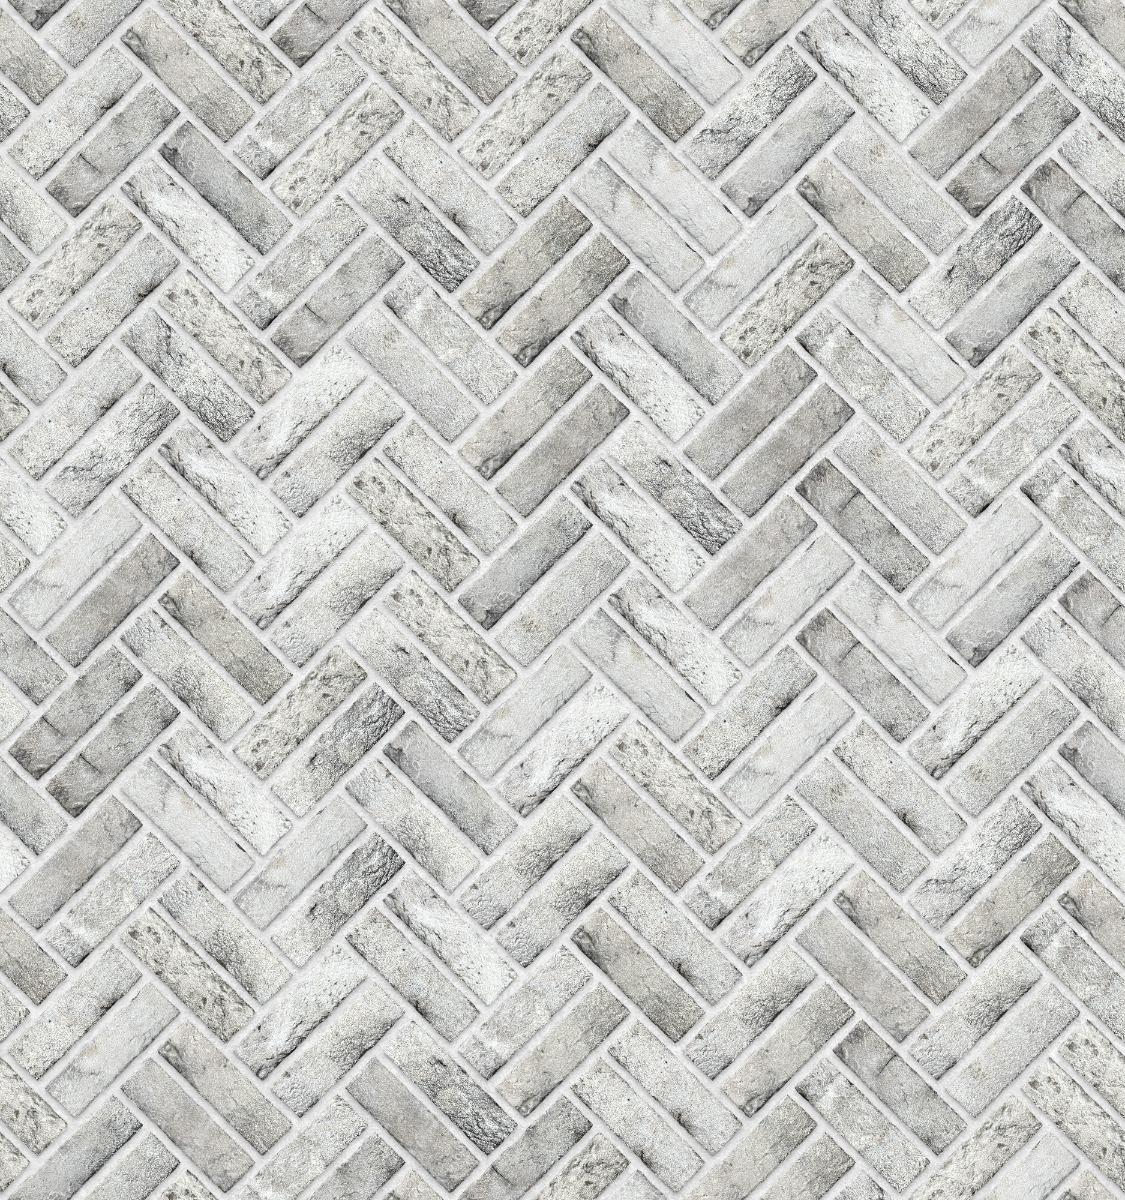 A seamless brick texture with nachte brick units arranged in a Double Herringbone pattern